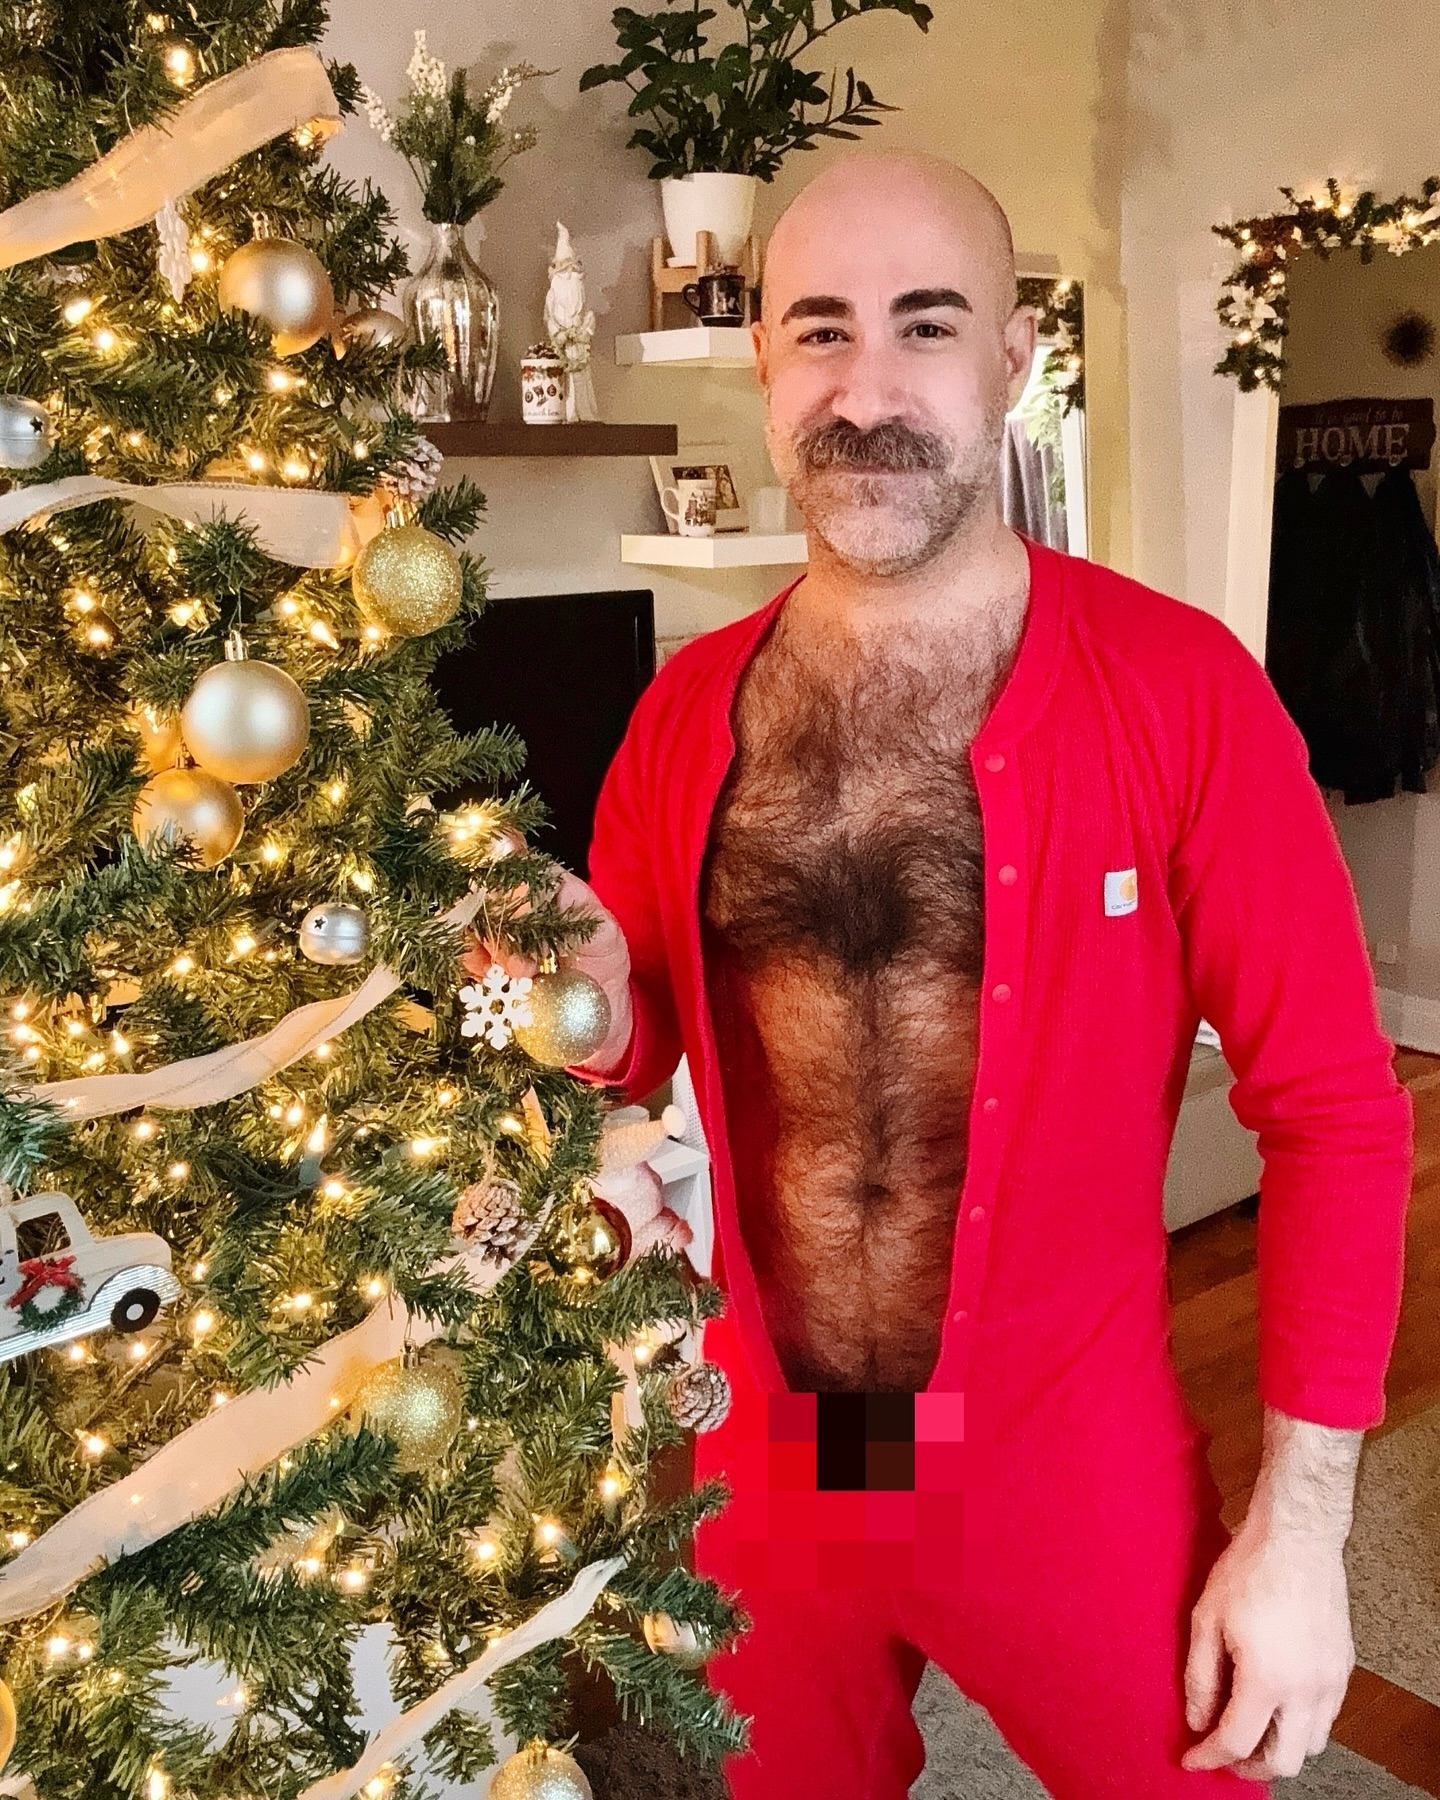 Have you been naughty or nice?? 🎅🏽 Unwrap the rest of my long underwear, boy, to see if you get a present this year. 🎁

#daddydamon #damonandros #hairy #hairydaddy #gay #gaydaddy #instagay #muscle #muscledaddy #instagay #beard #bearded #beardeddaddy #jock #gayjock #musclejock #bear #instahairy #gayhairy #hairygay #instadaddy #hairychest #furry #selfie #gayselfie #instafit #gaymodel #hairymodel #beard #scruff #longunderwear #mustache